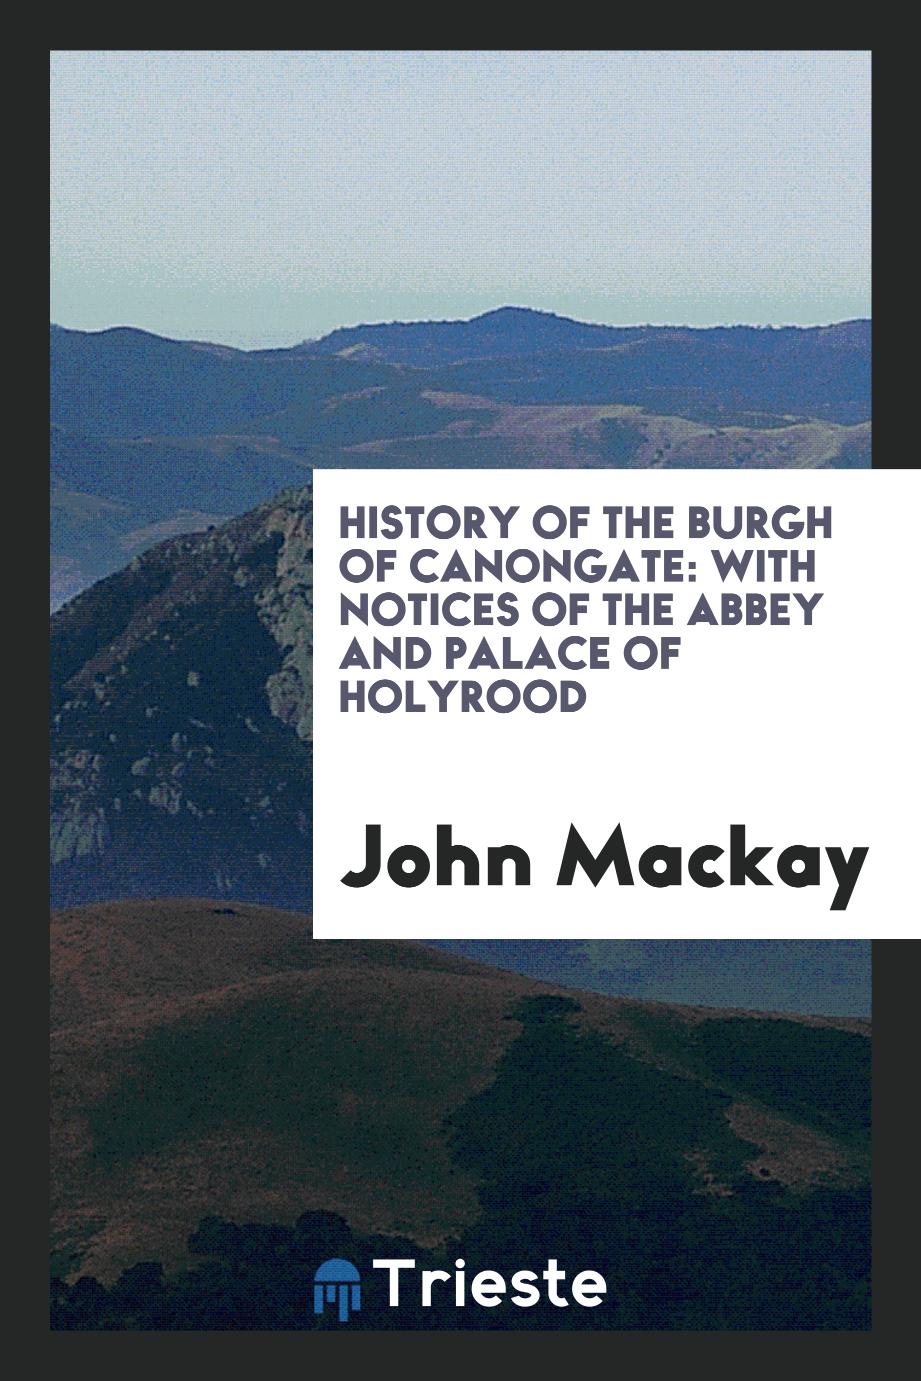 History of the Burgh of Canongate: With Notices of the Abbey and Palace of Holyrood